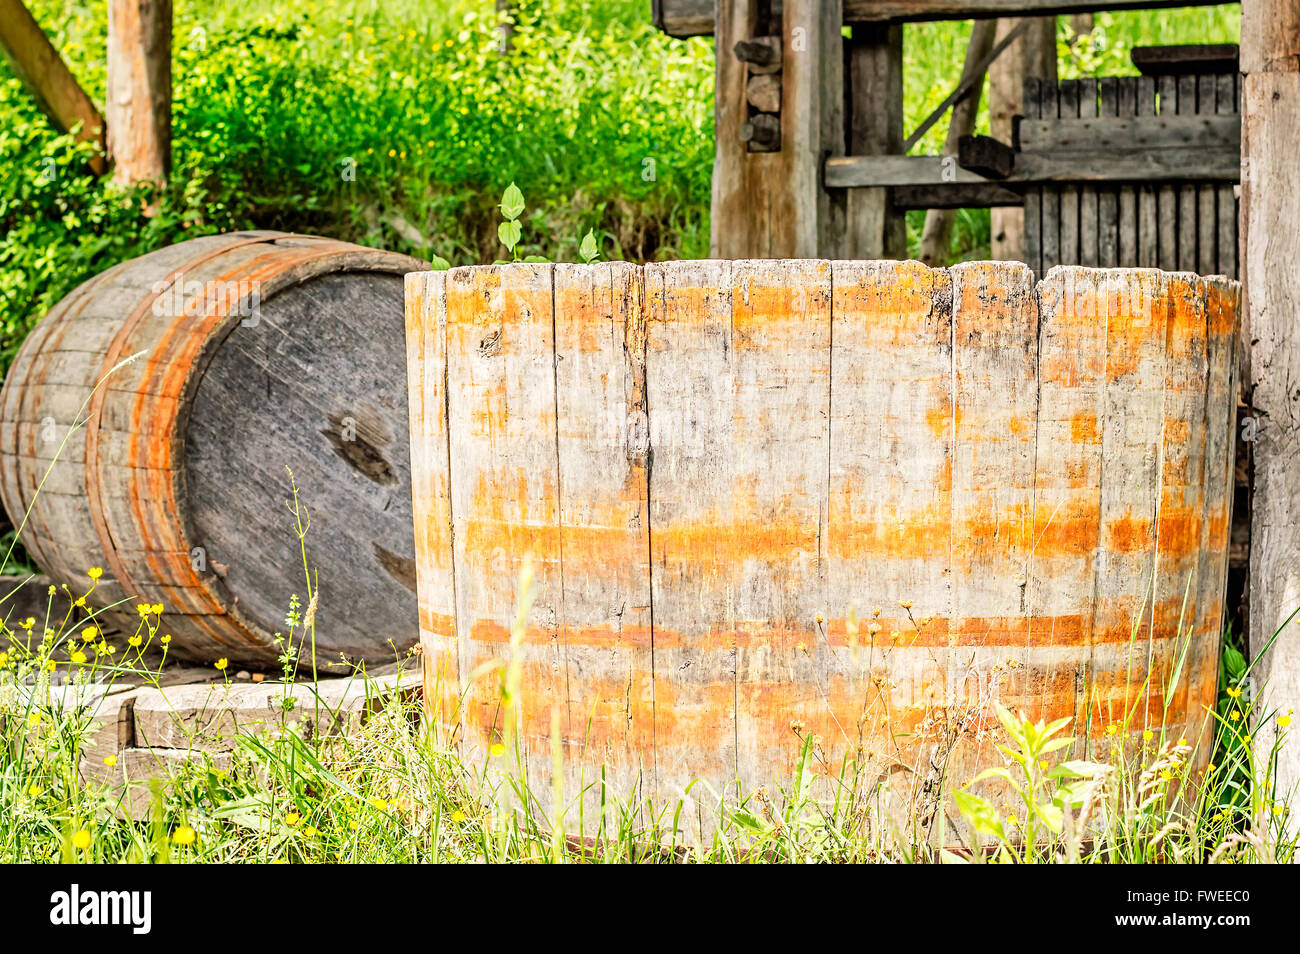 Old wood barrel used for stomping or crushing grapes. Stock Photo